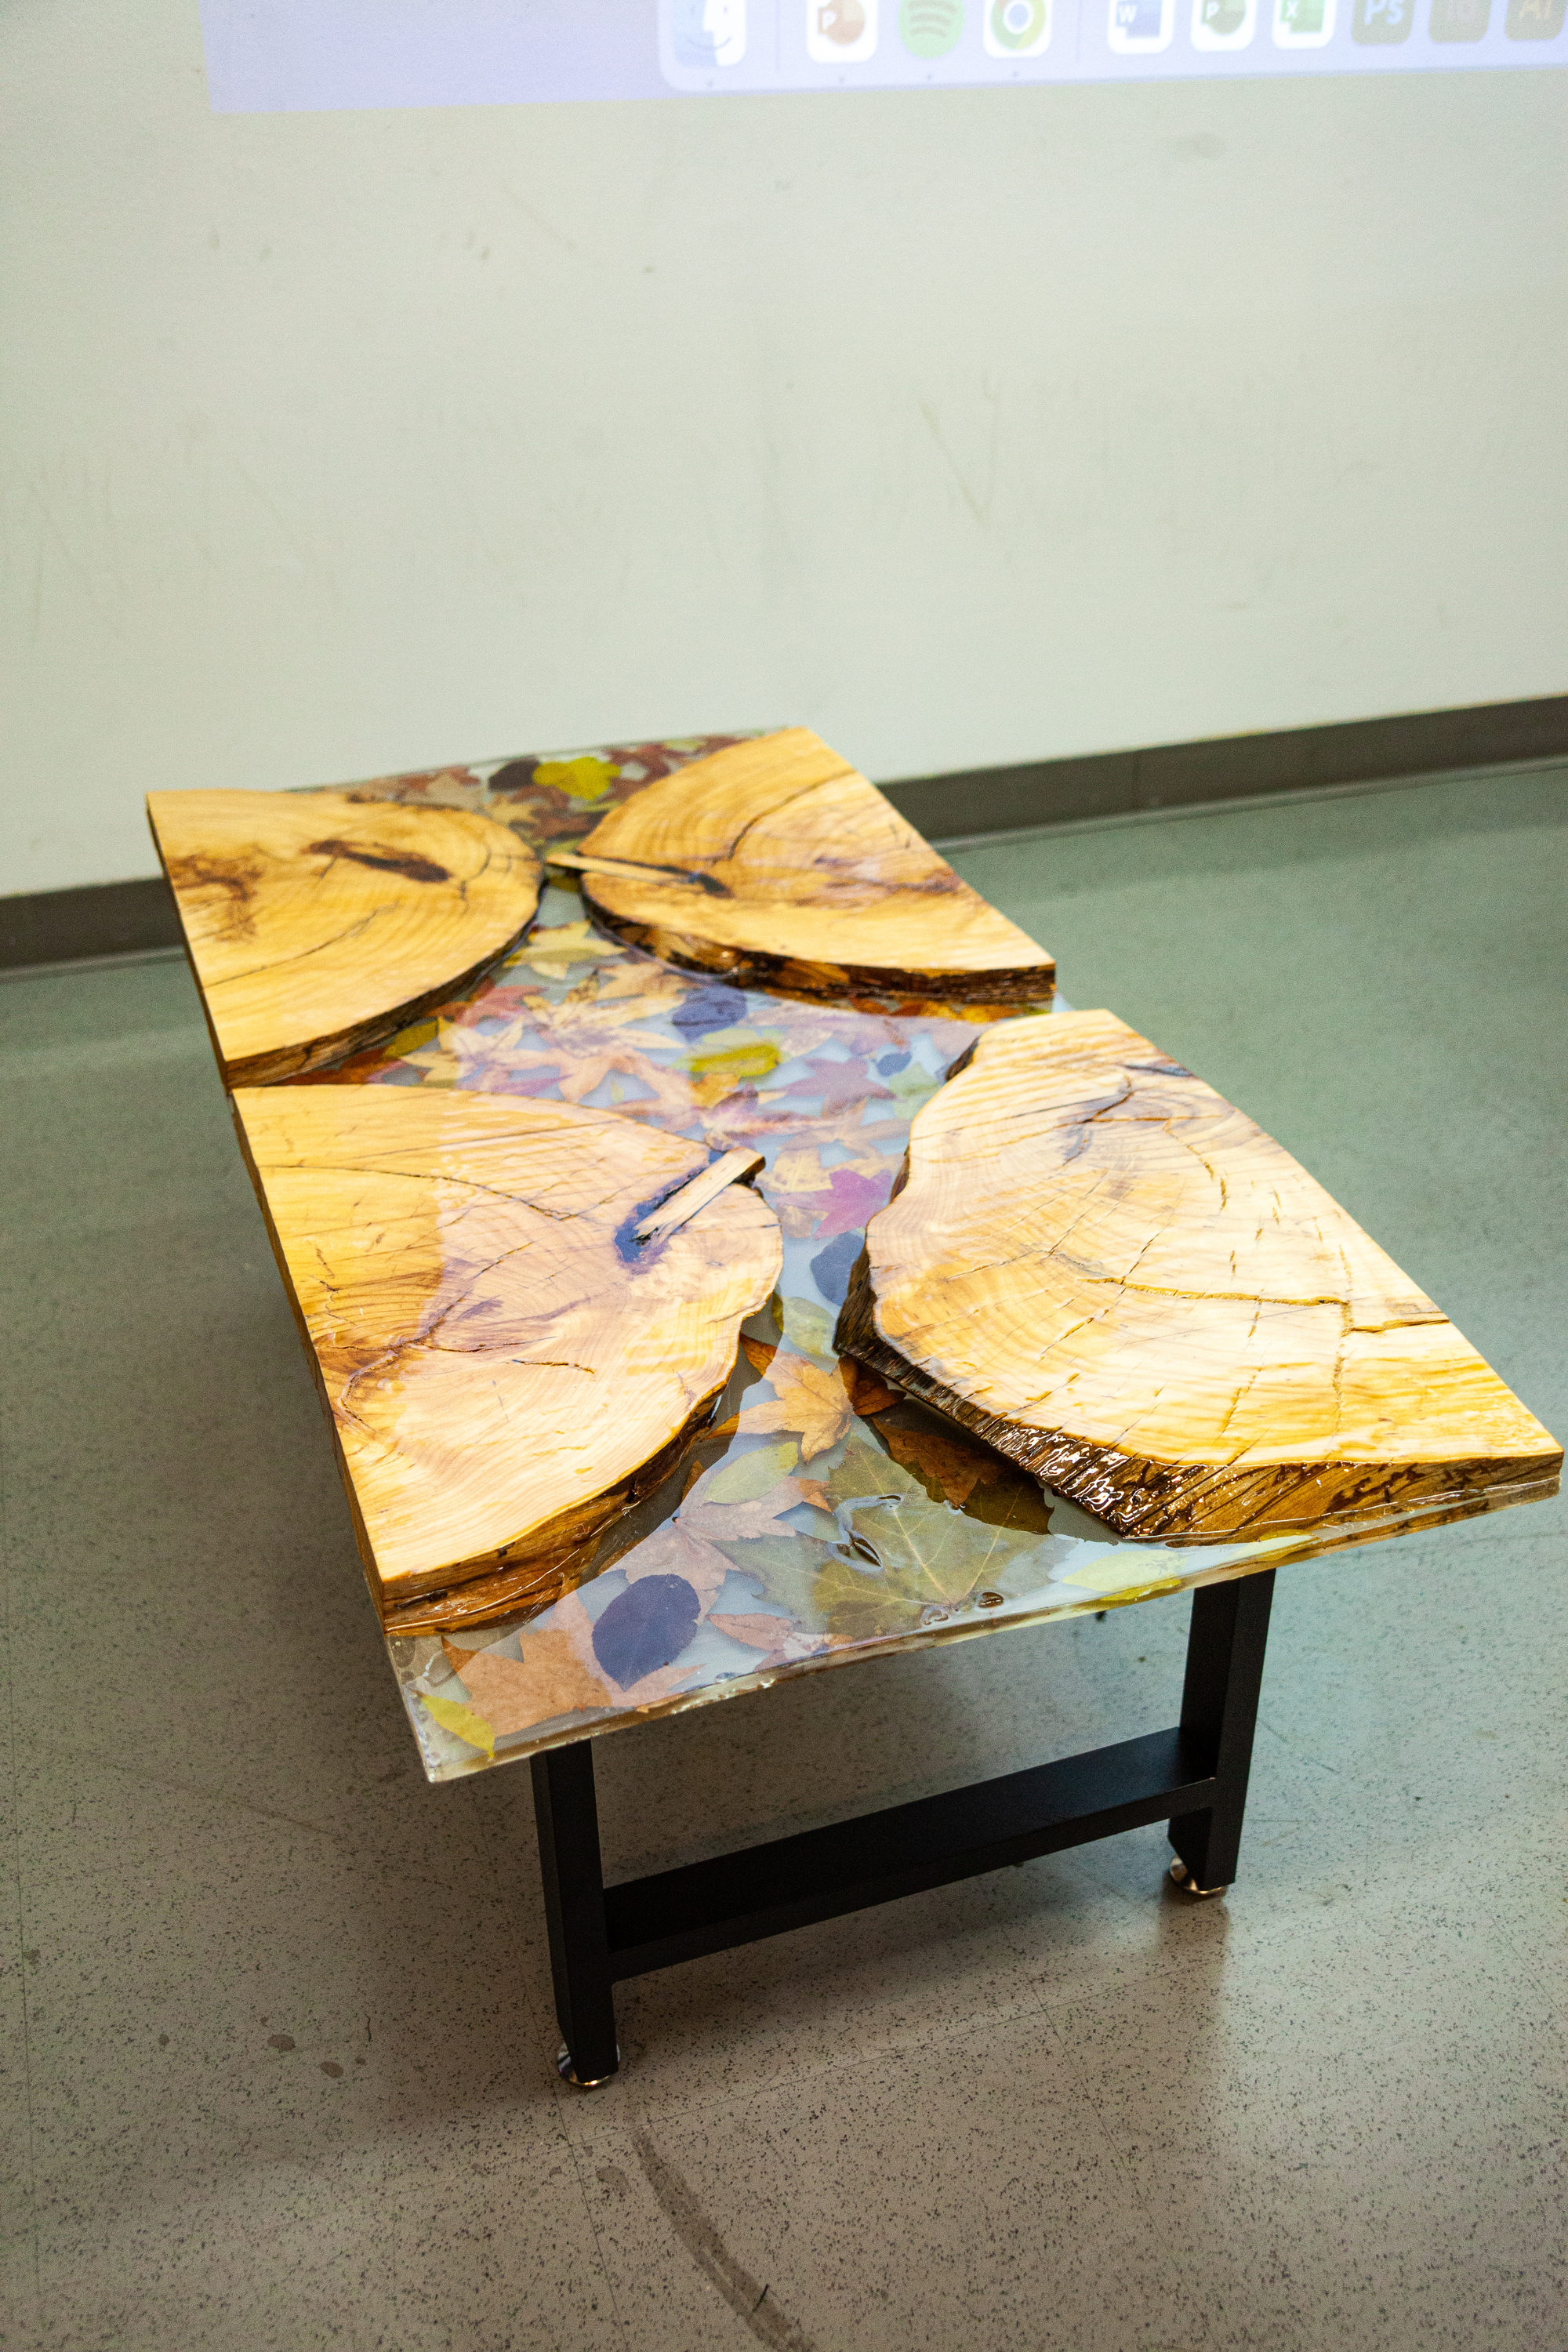 A reverse river resin coffee table made of mostly resin flows around four slices of wood that was once a tree stump. Autumn leaves have been embedded in the resin, as if the table itself were a slice of a river frozen in time.